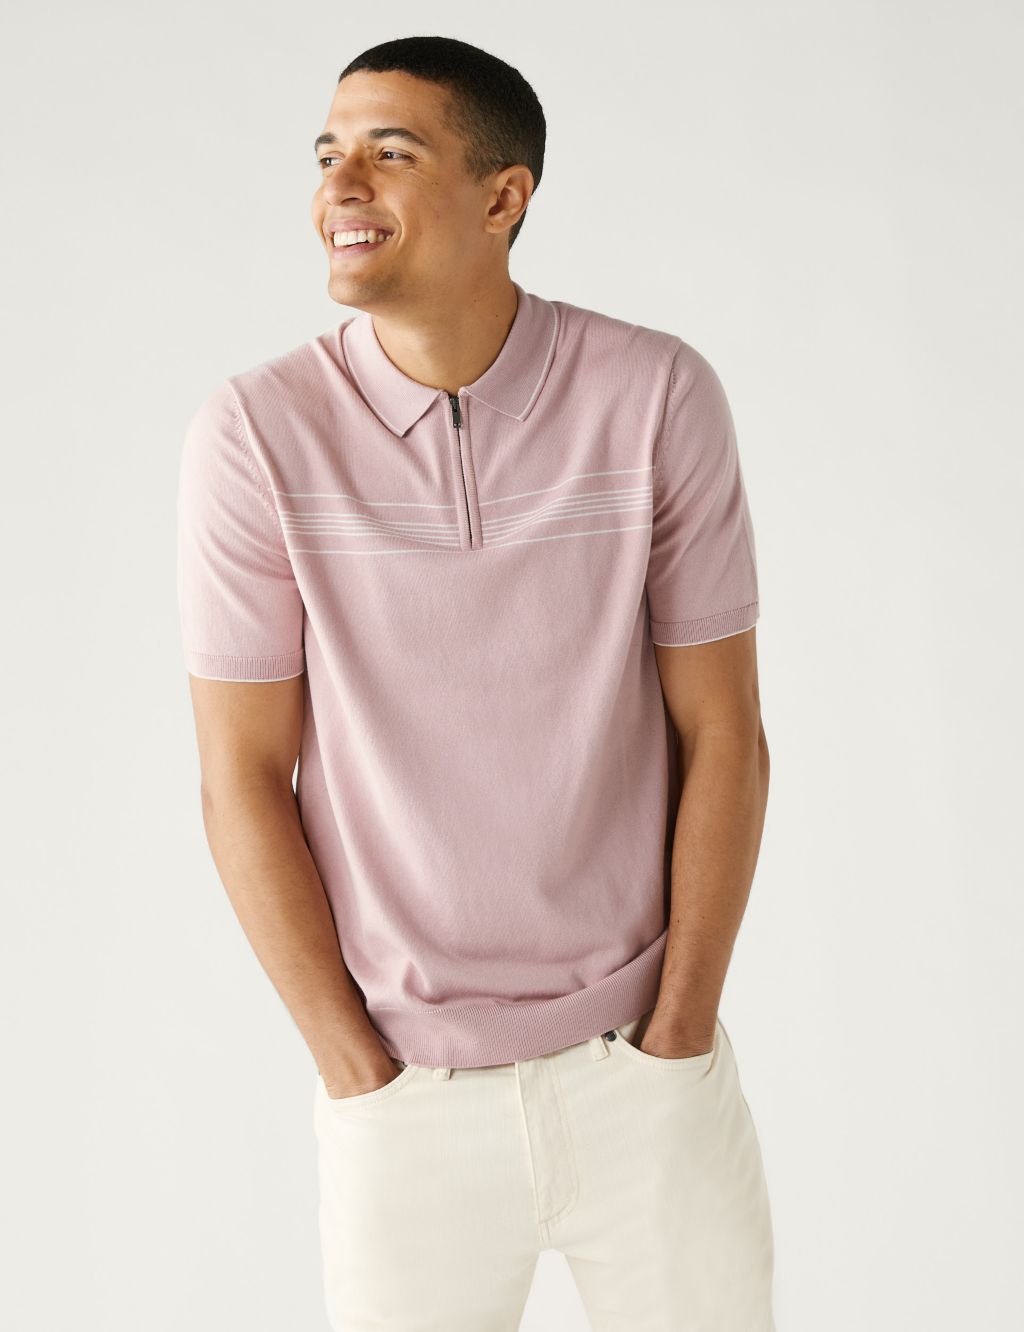 Cotton Modal Chest Stripe Knitted Polo Shirt image 1